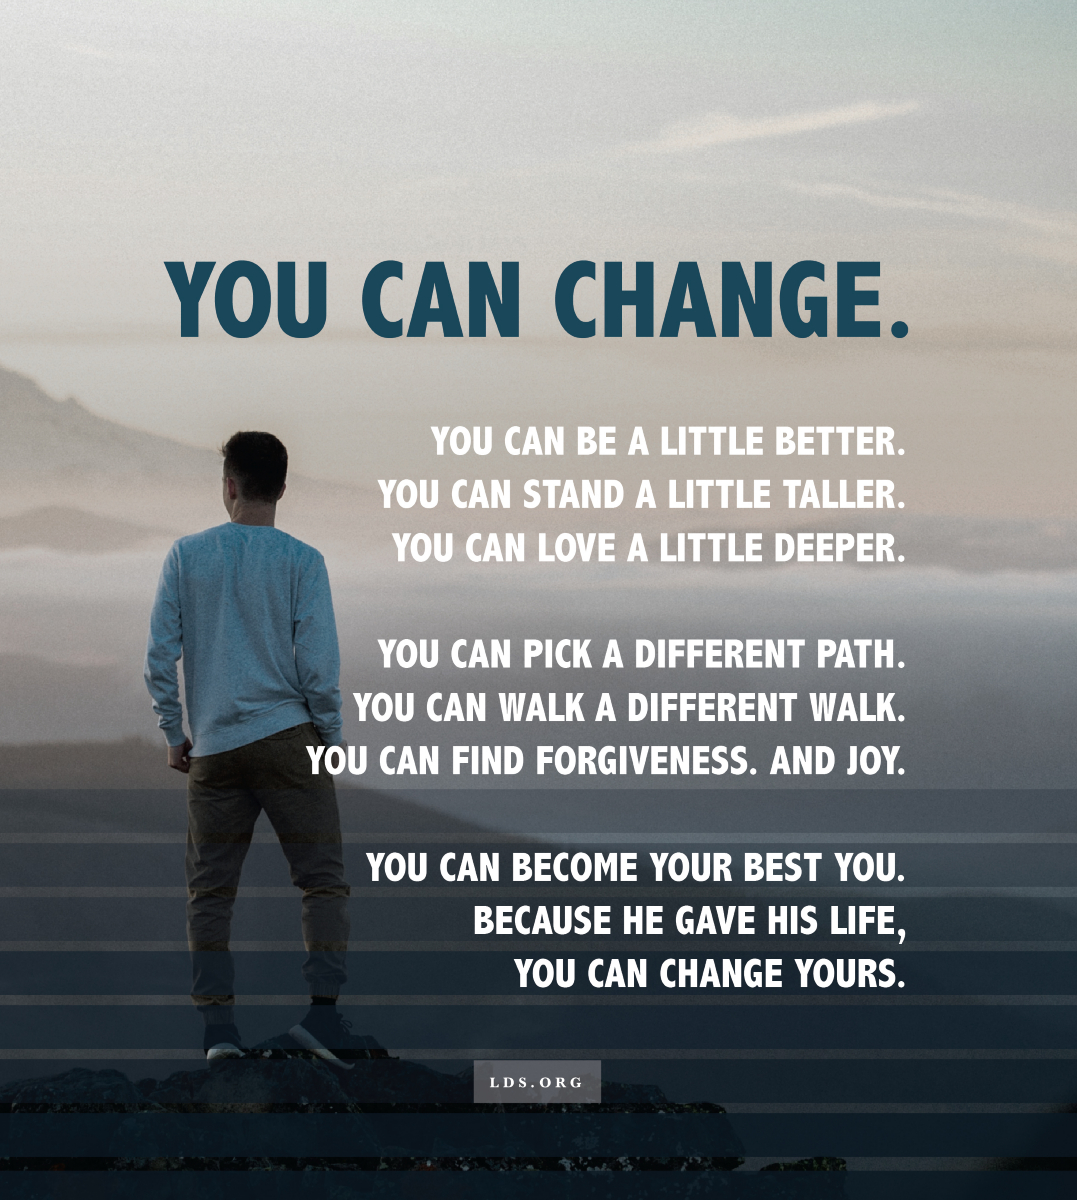 brand new life quotes you can change